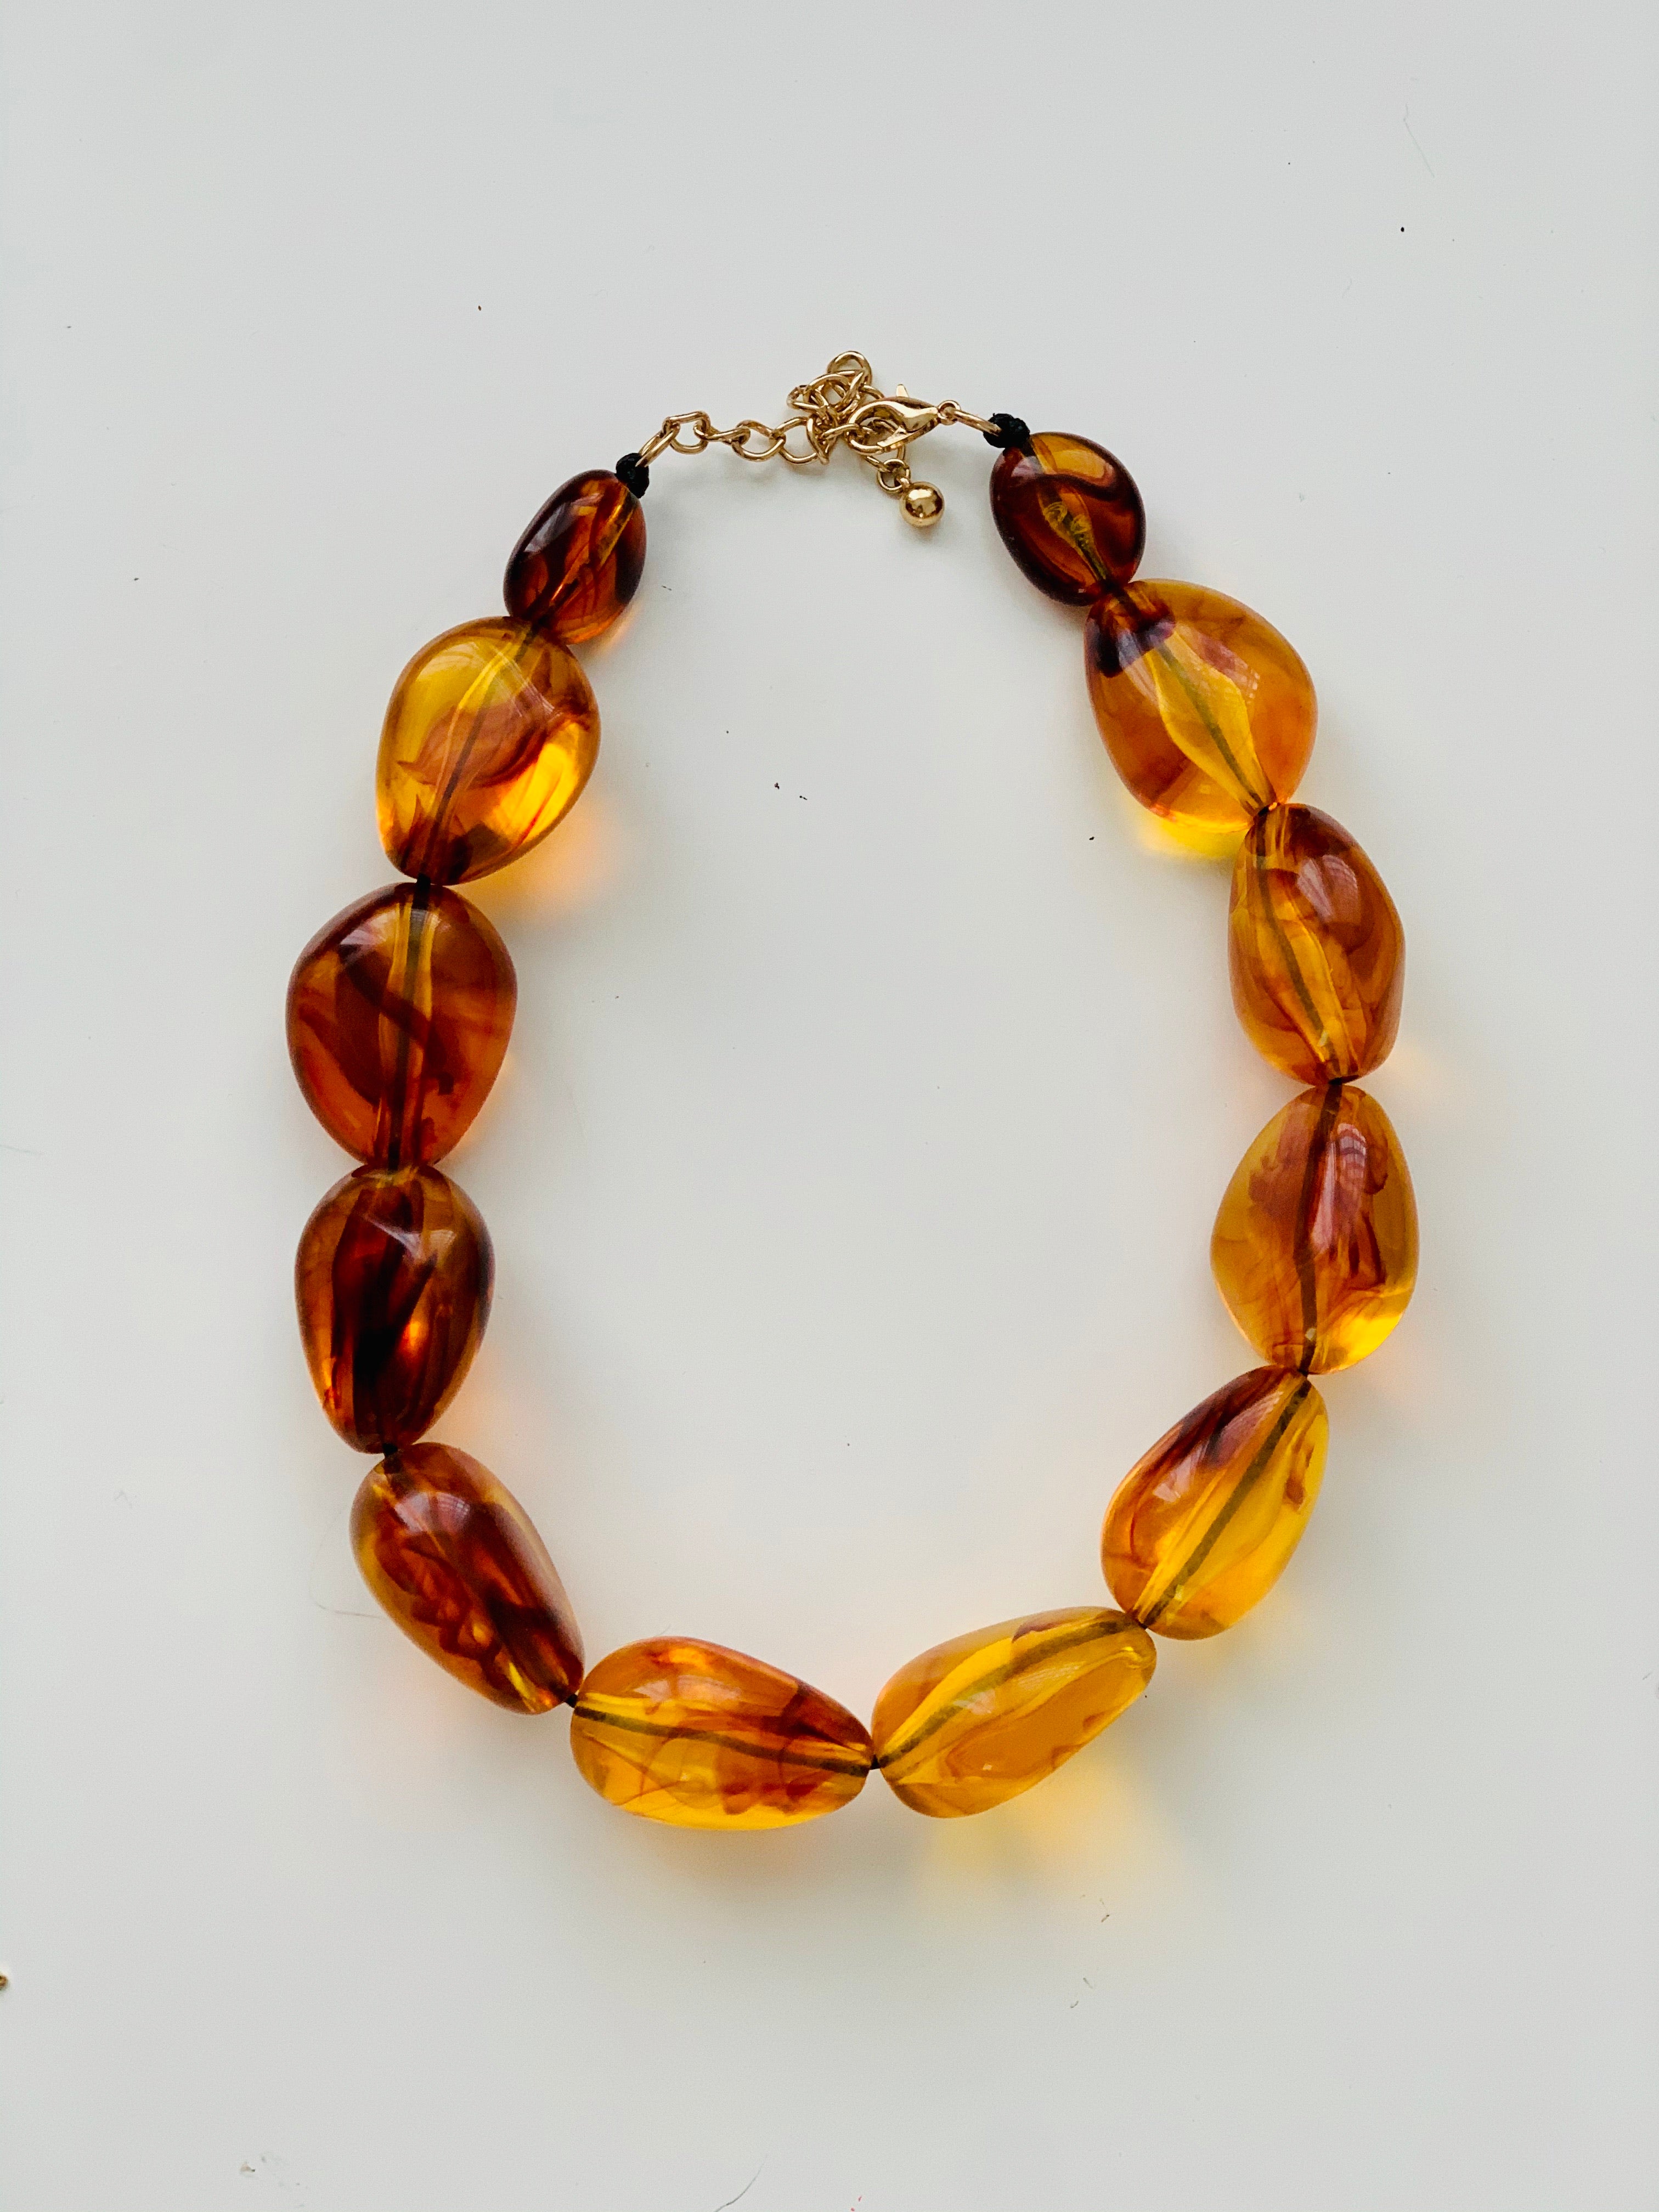 Amber Statement Necklace